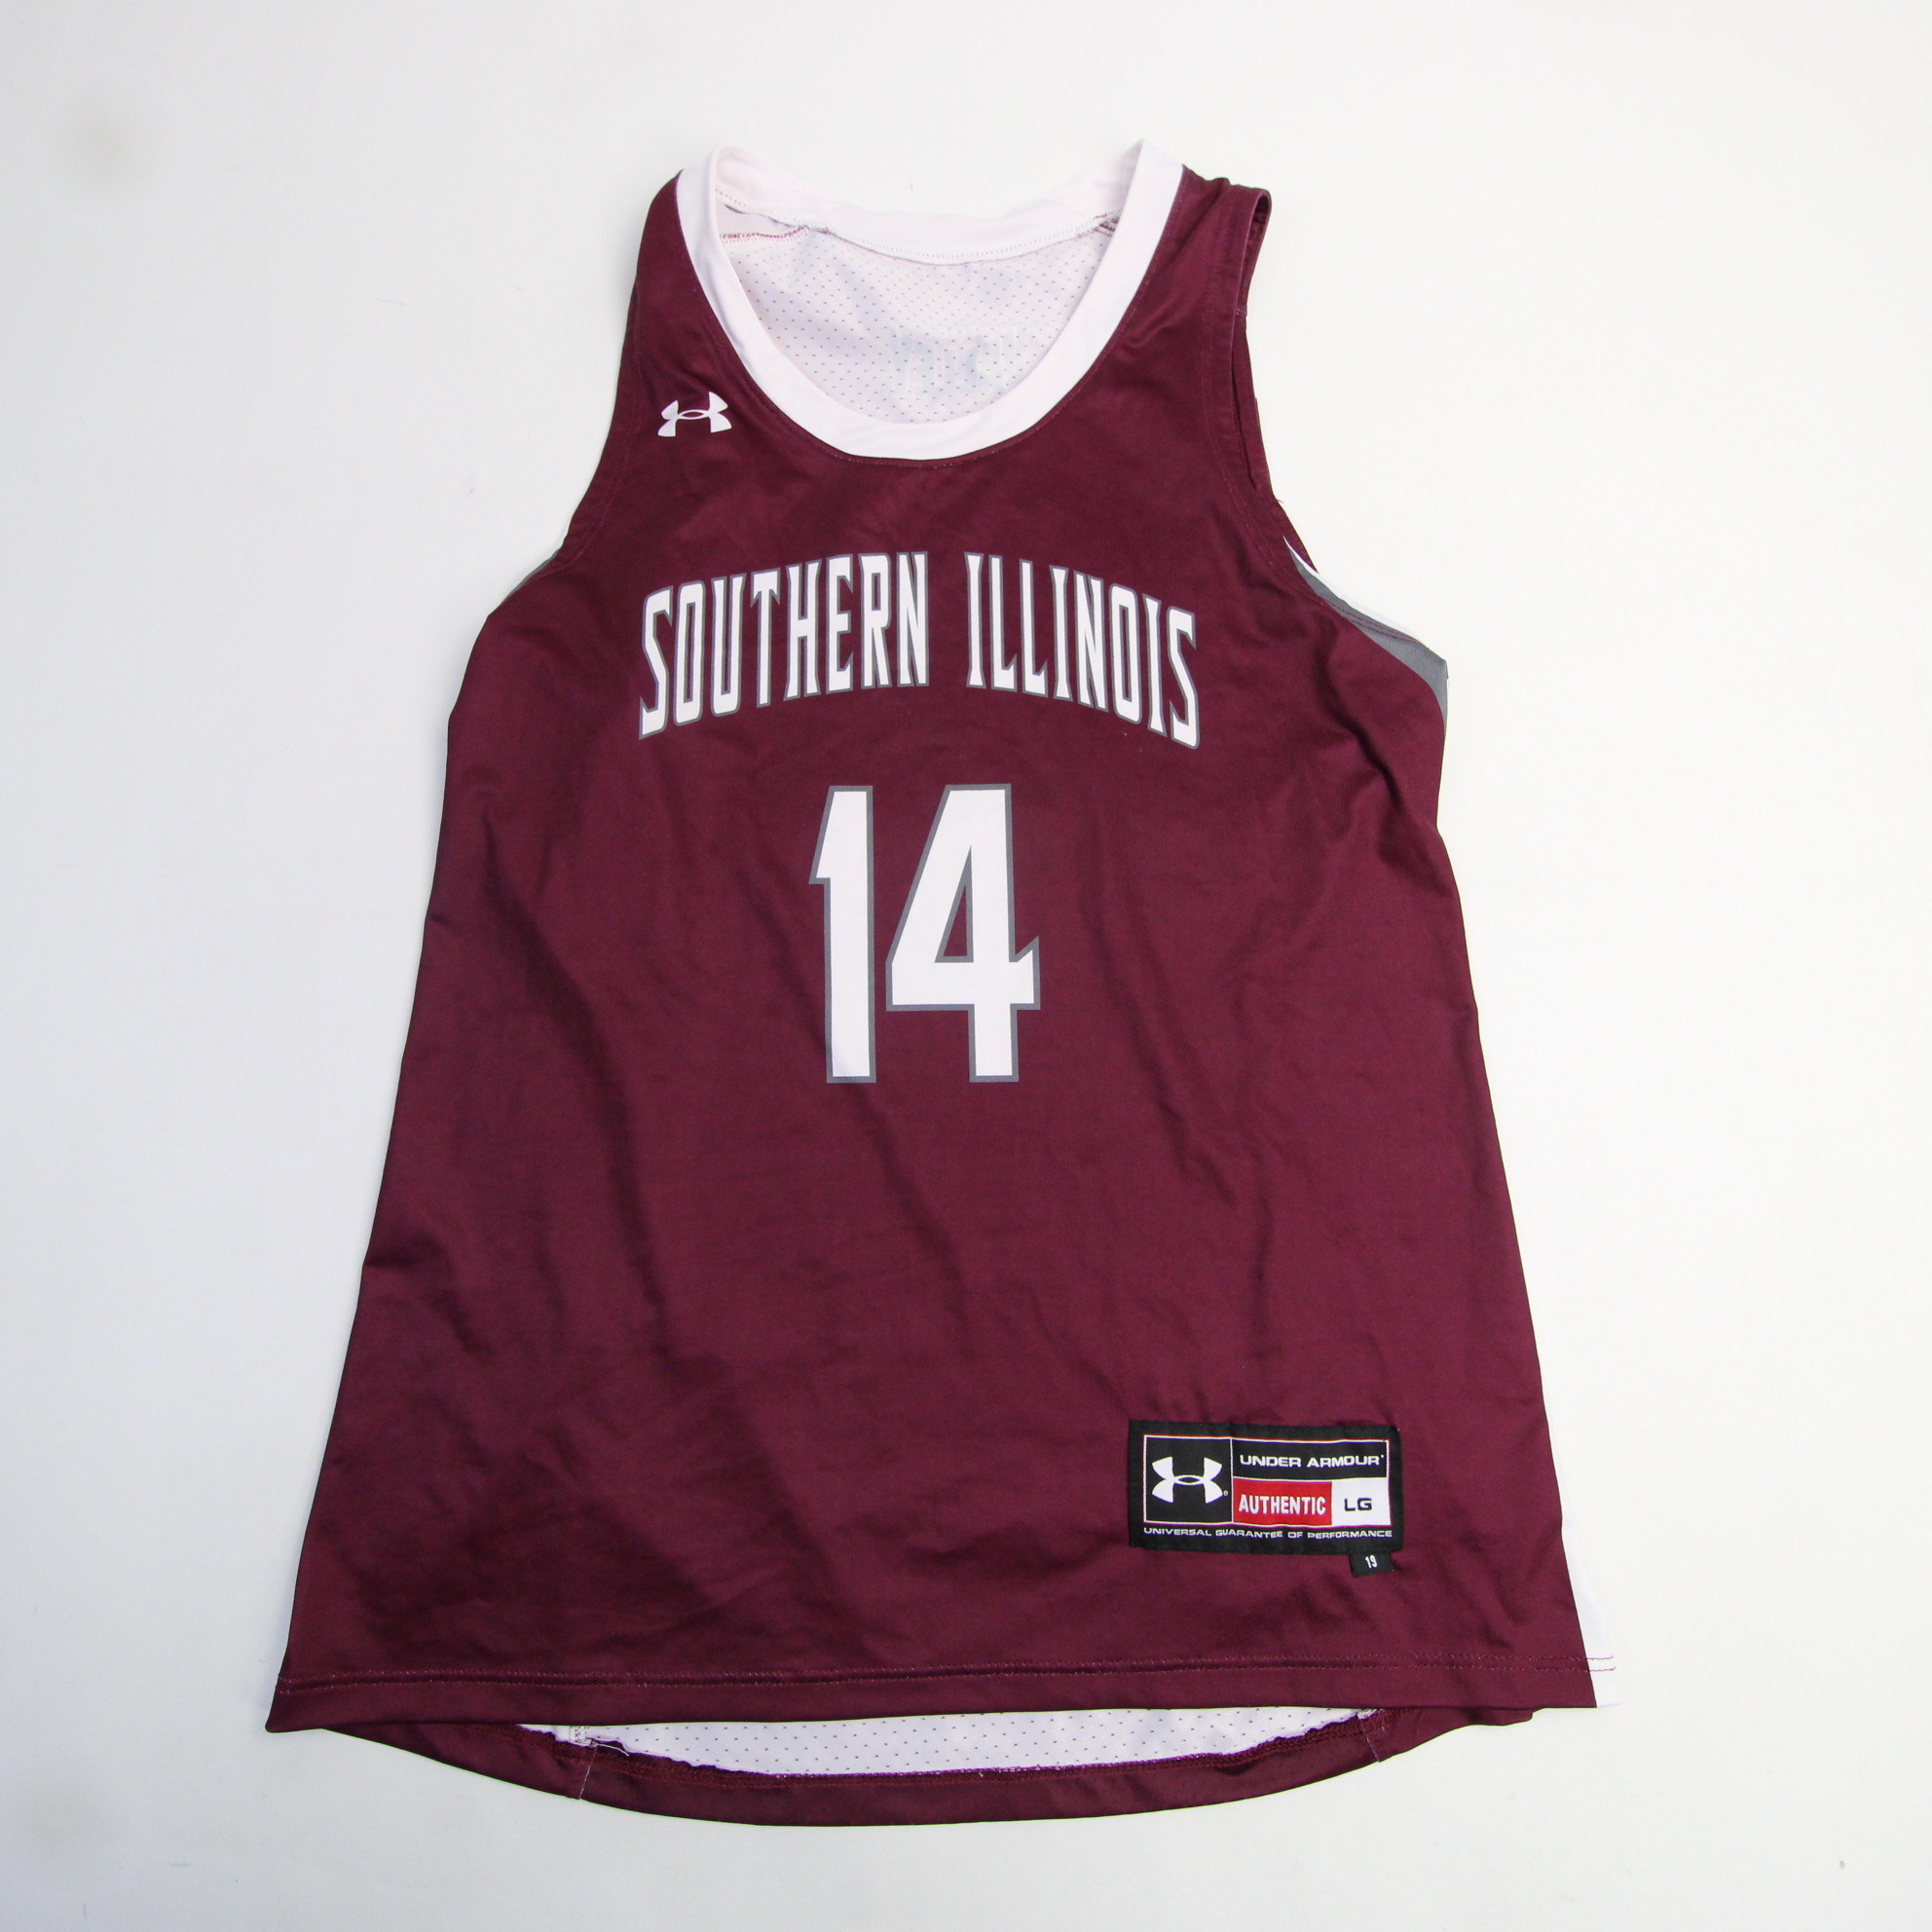 Southern Illinois Salukis Under Armour Game Jersey - Basketball